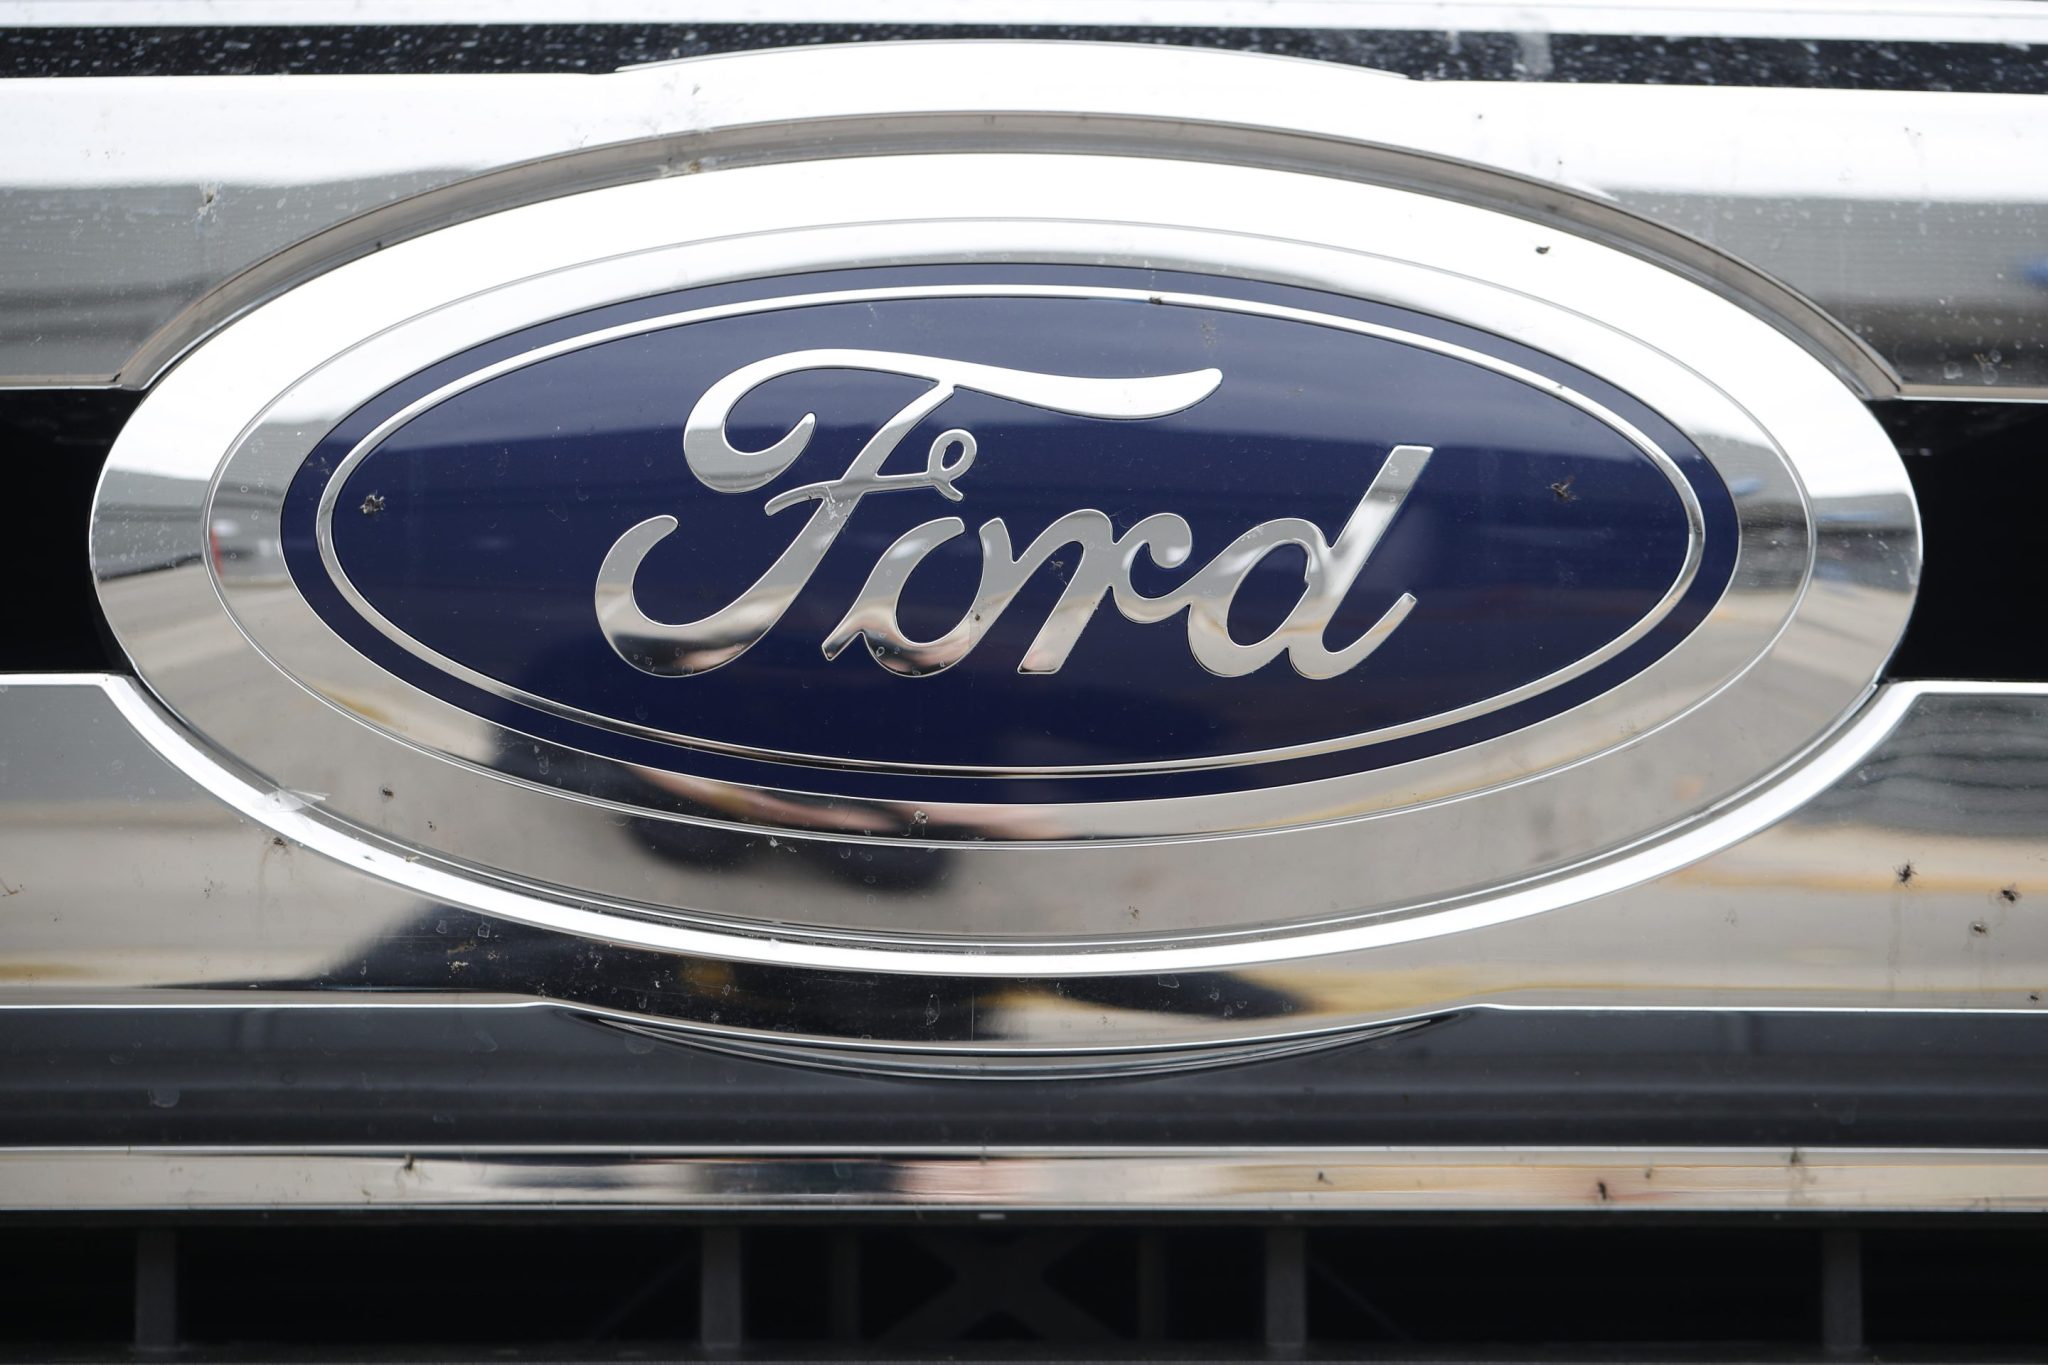 National Highway Traffic Safety Administration auto safety investigators expand Ford Motor Company probe to nearly 709,000 vehicles